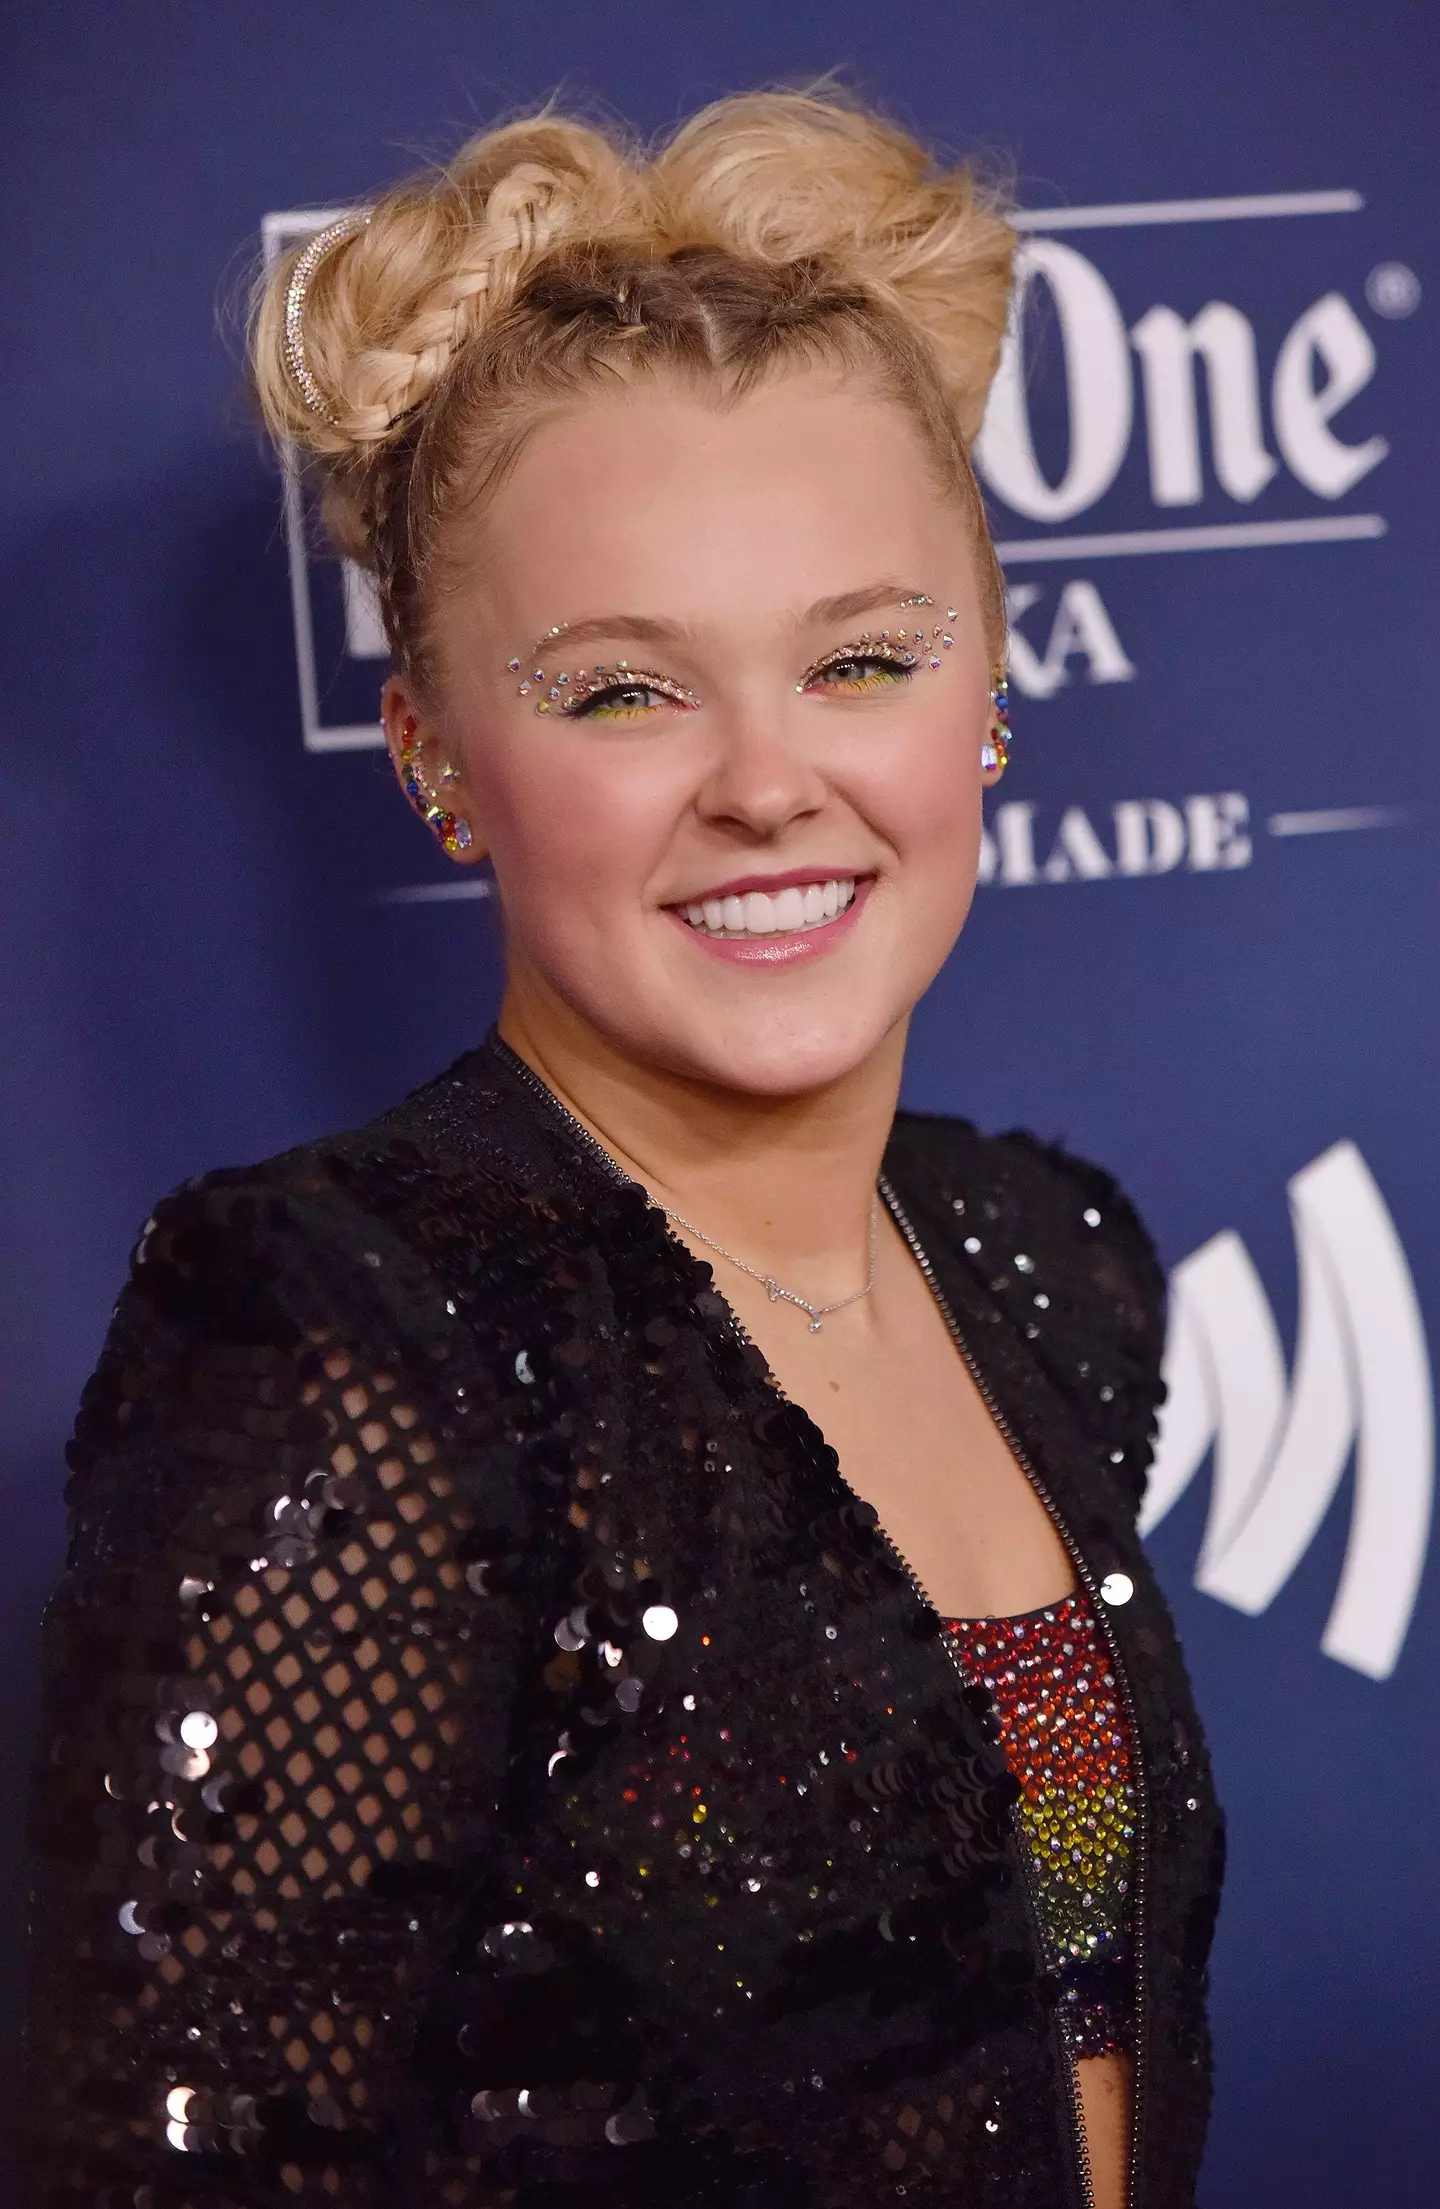 JoJo Siwa has said she feels more mature than other teenagers except when it comes to relationships.